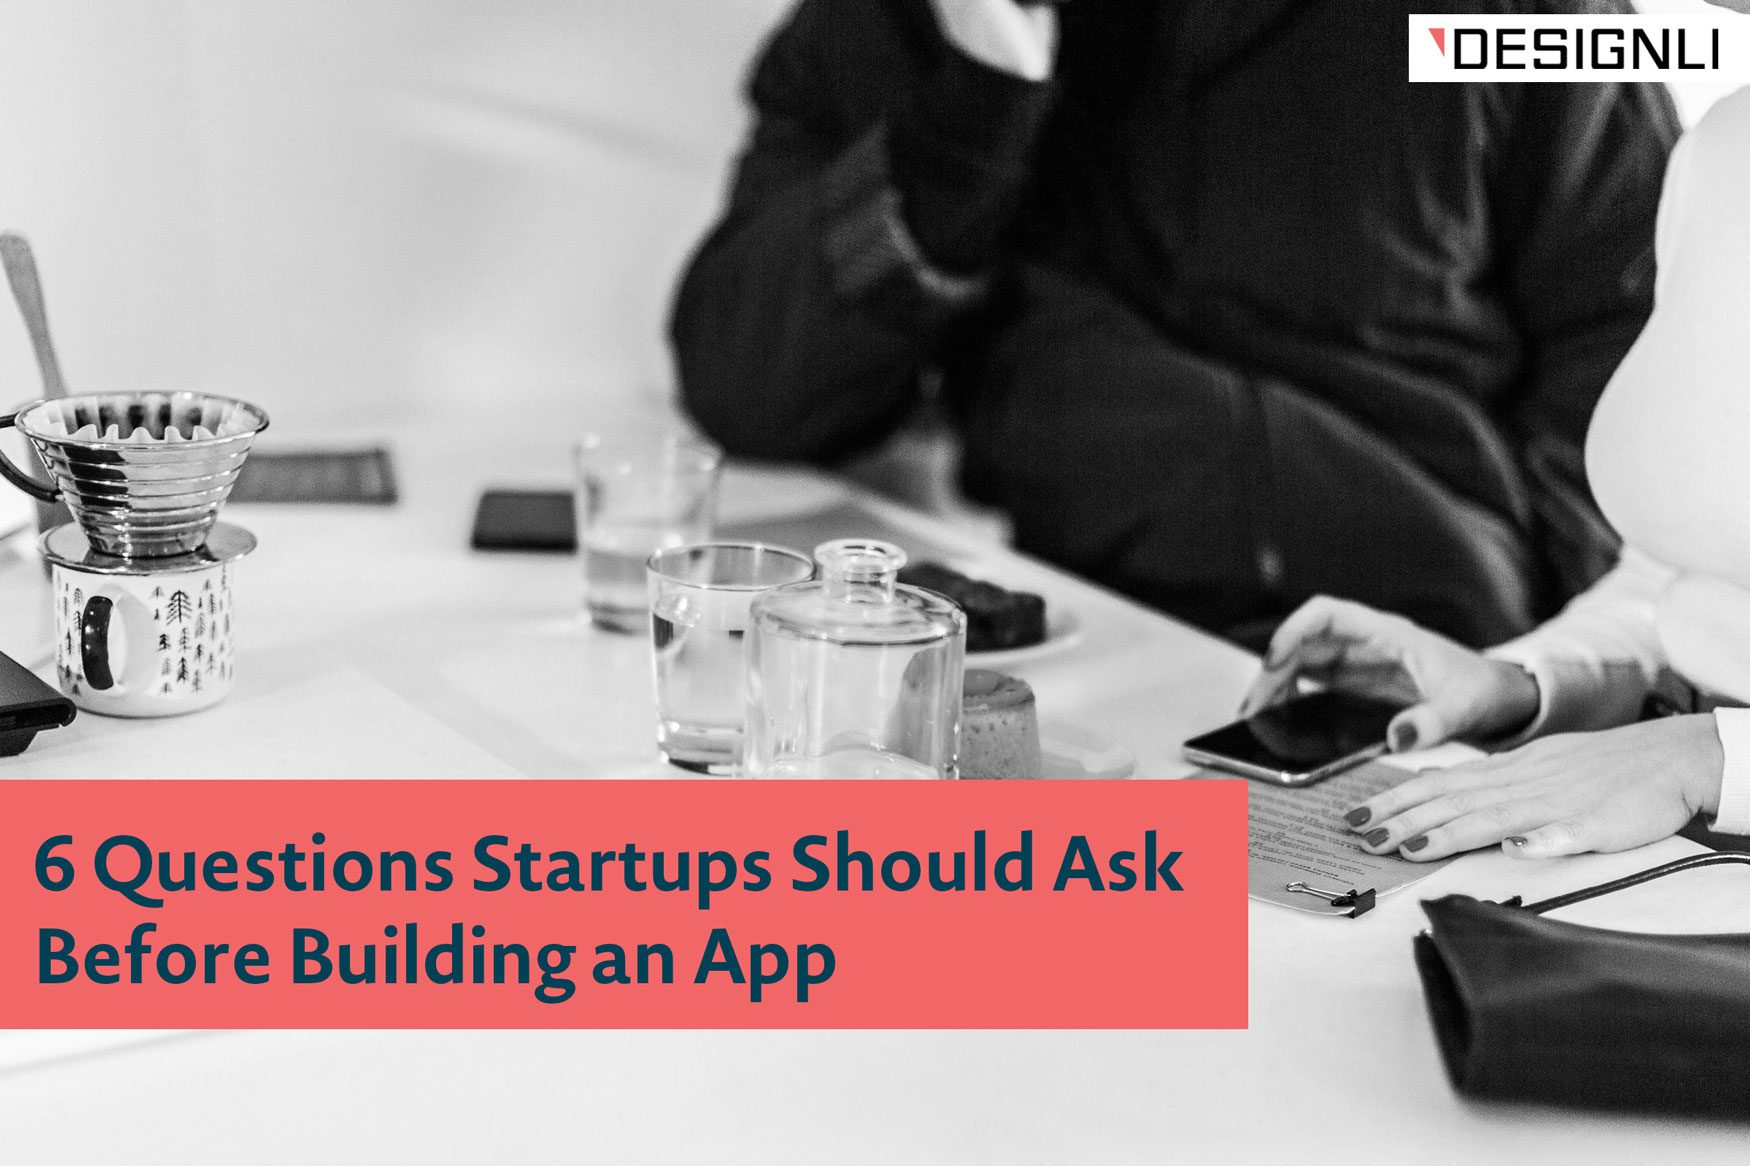 6 Questions Startups Should Ask Before Building an App